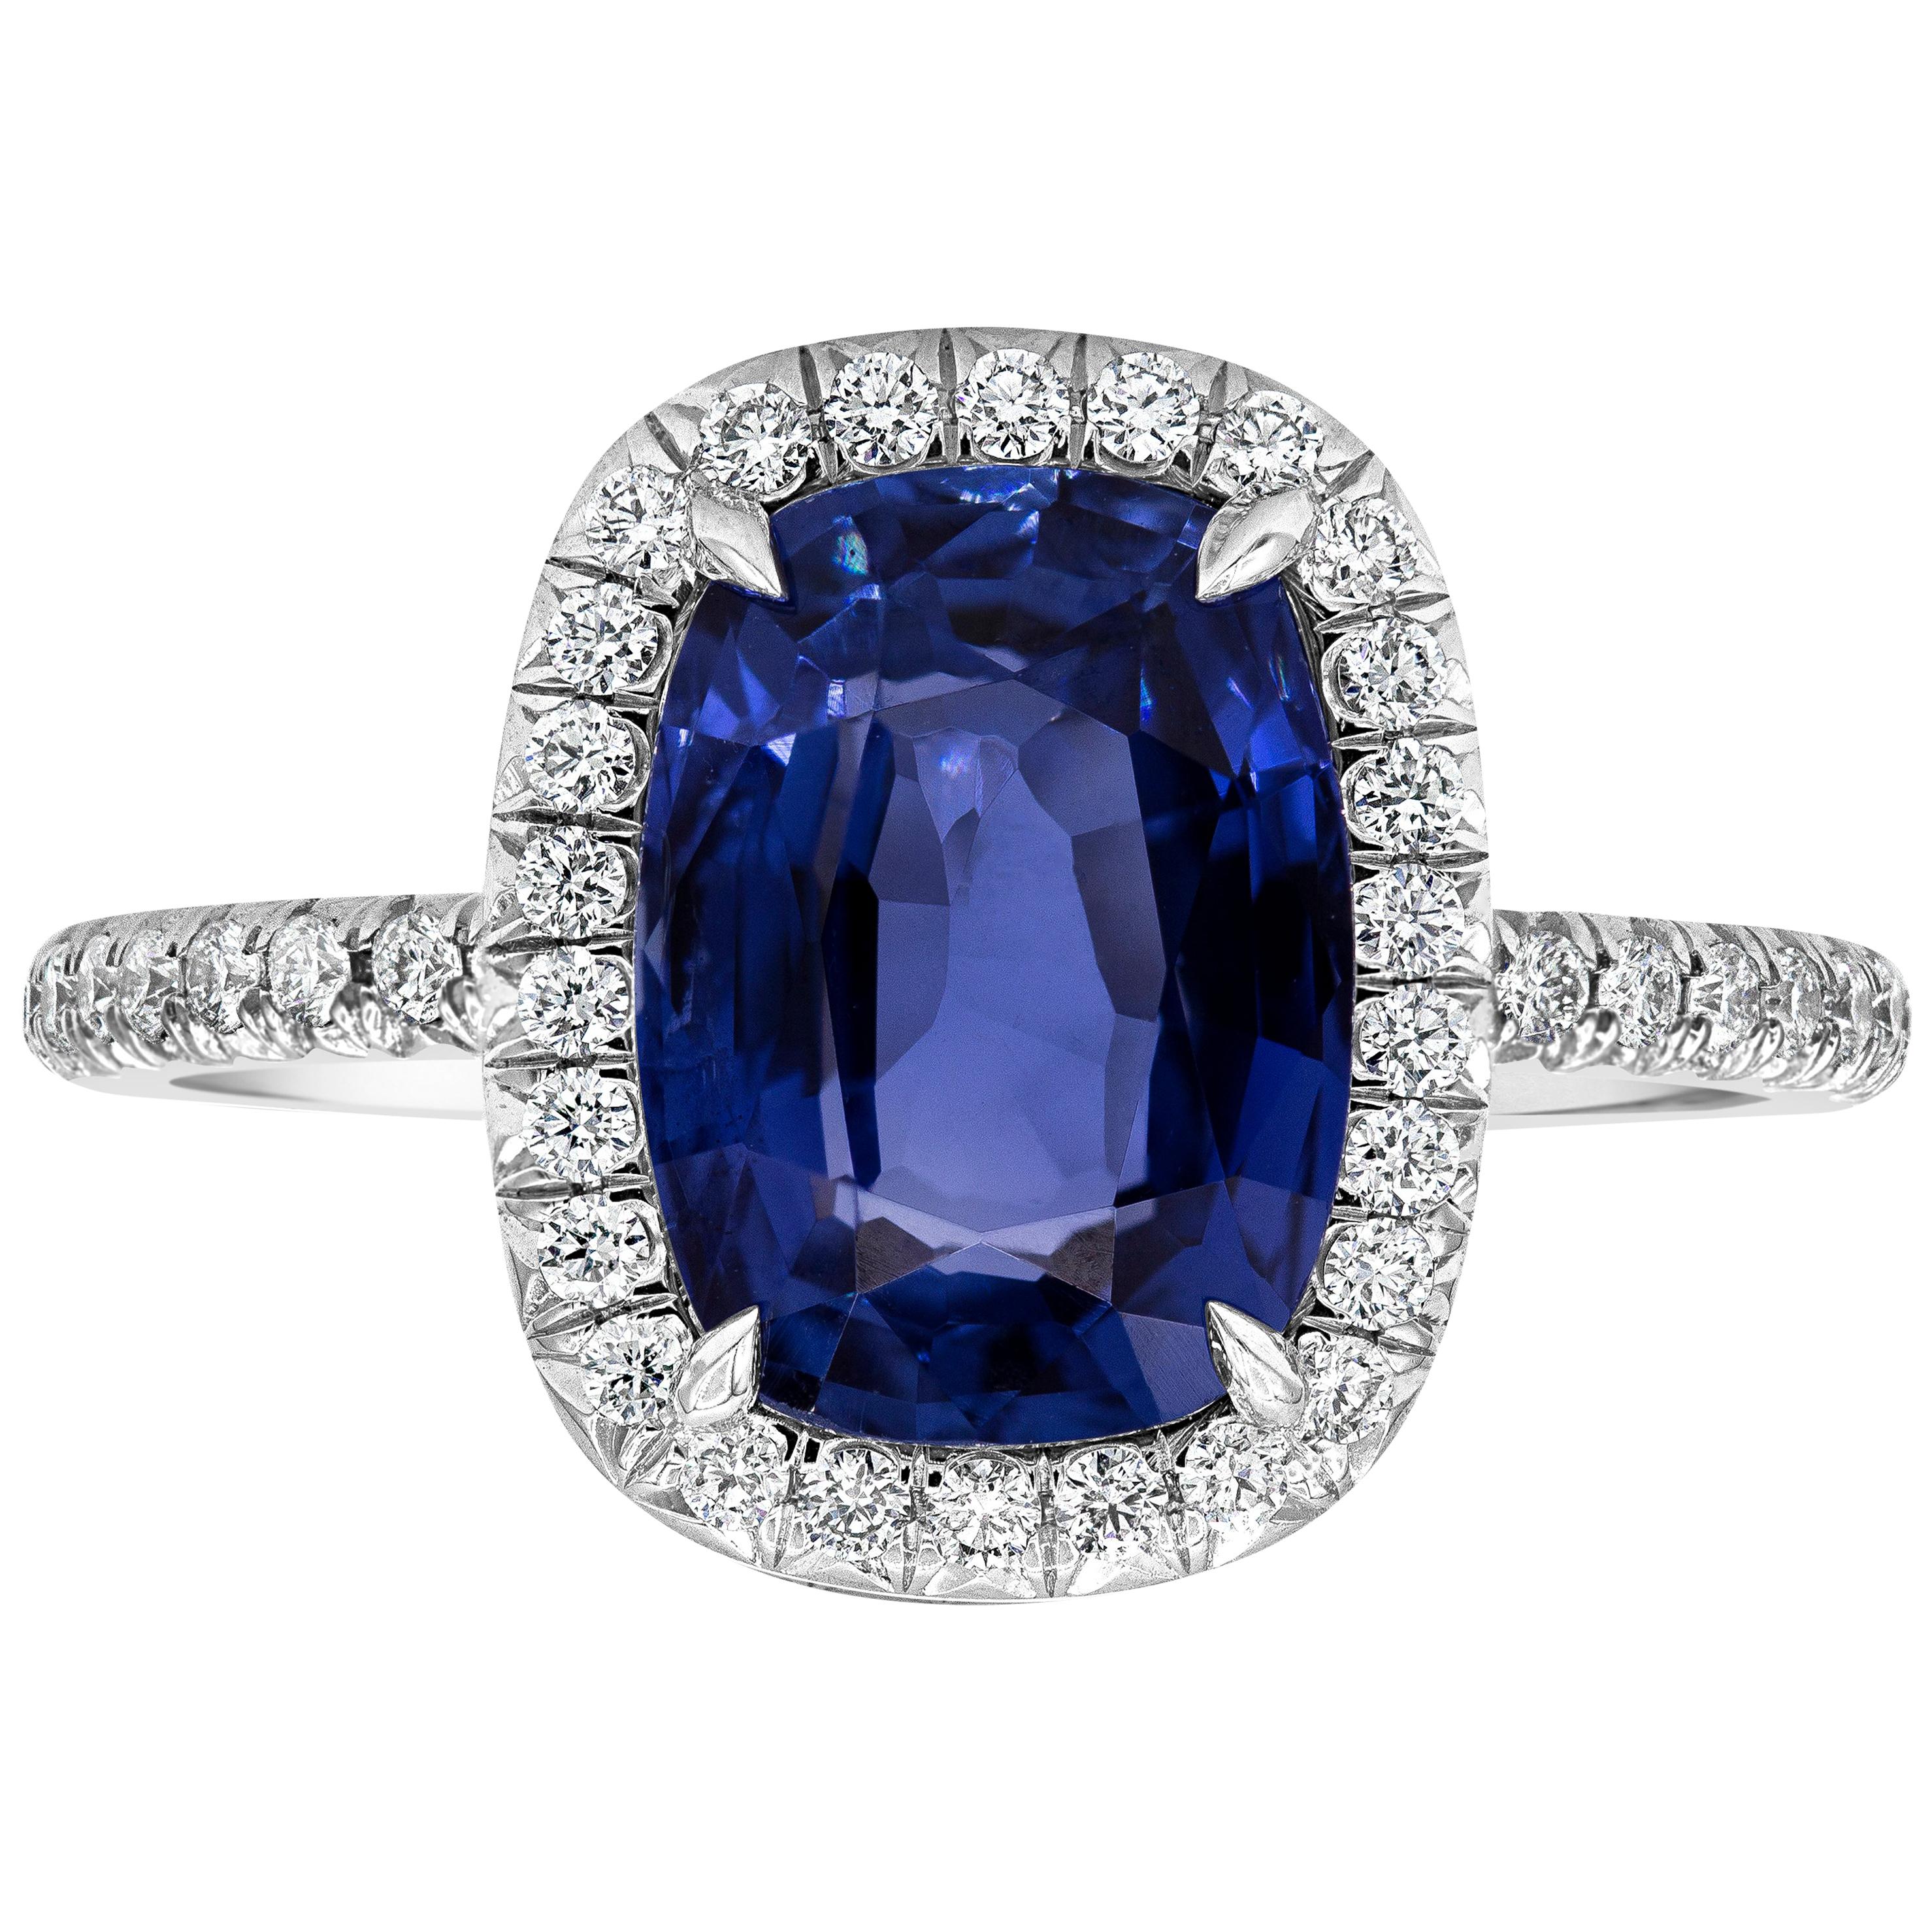 GIA Certified 3.37 Carat Cushion Cut Sapphire with Diamond Halo Engagement Ring For Sale